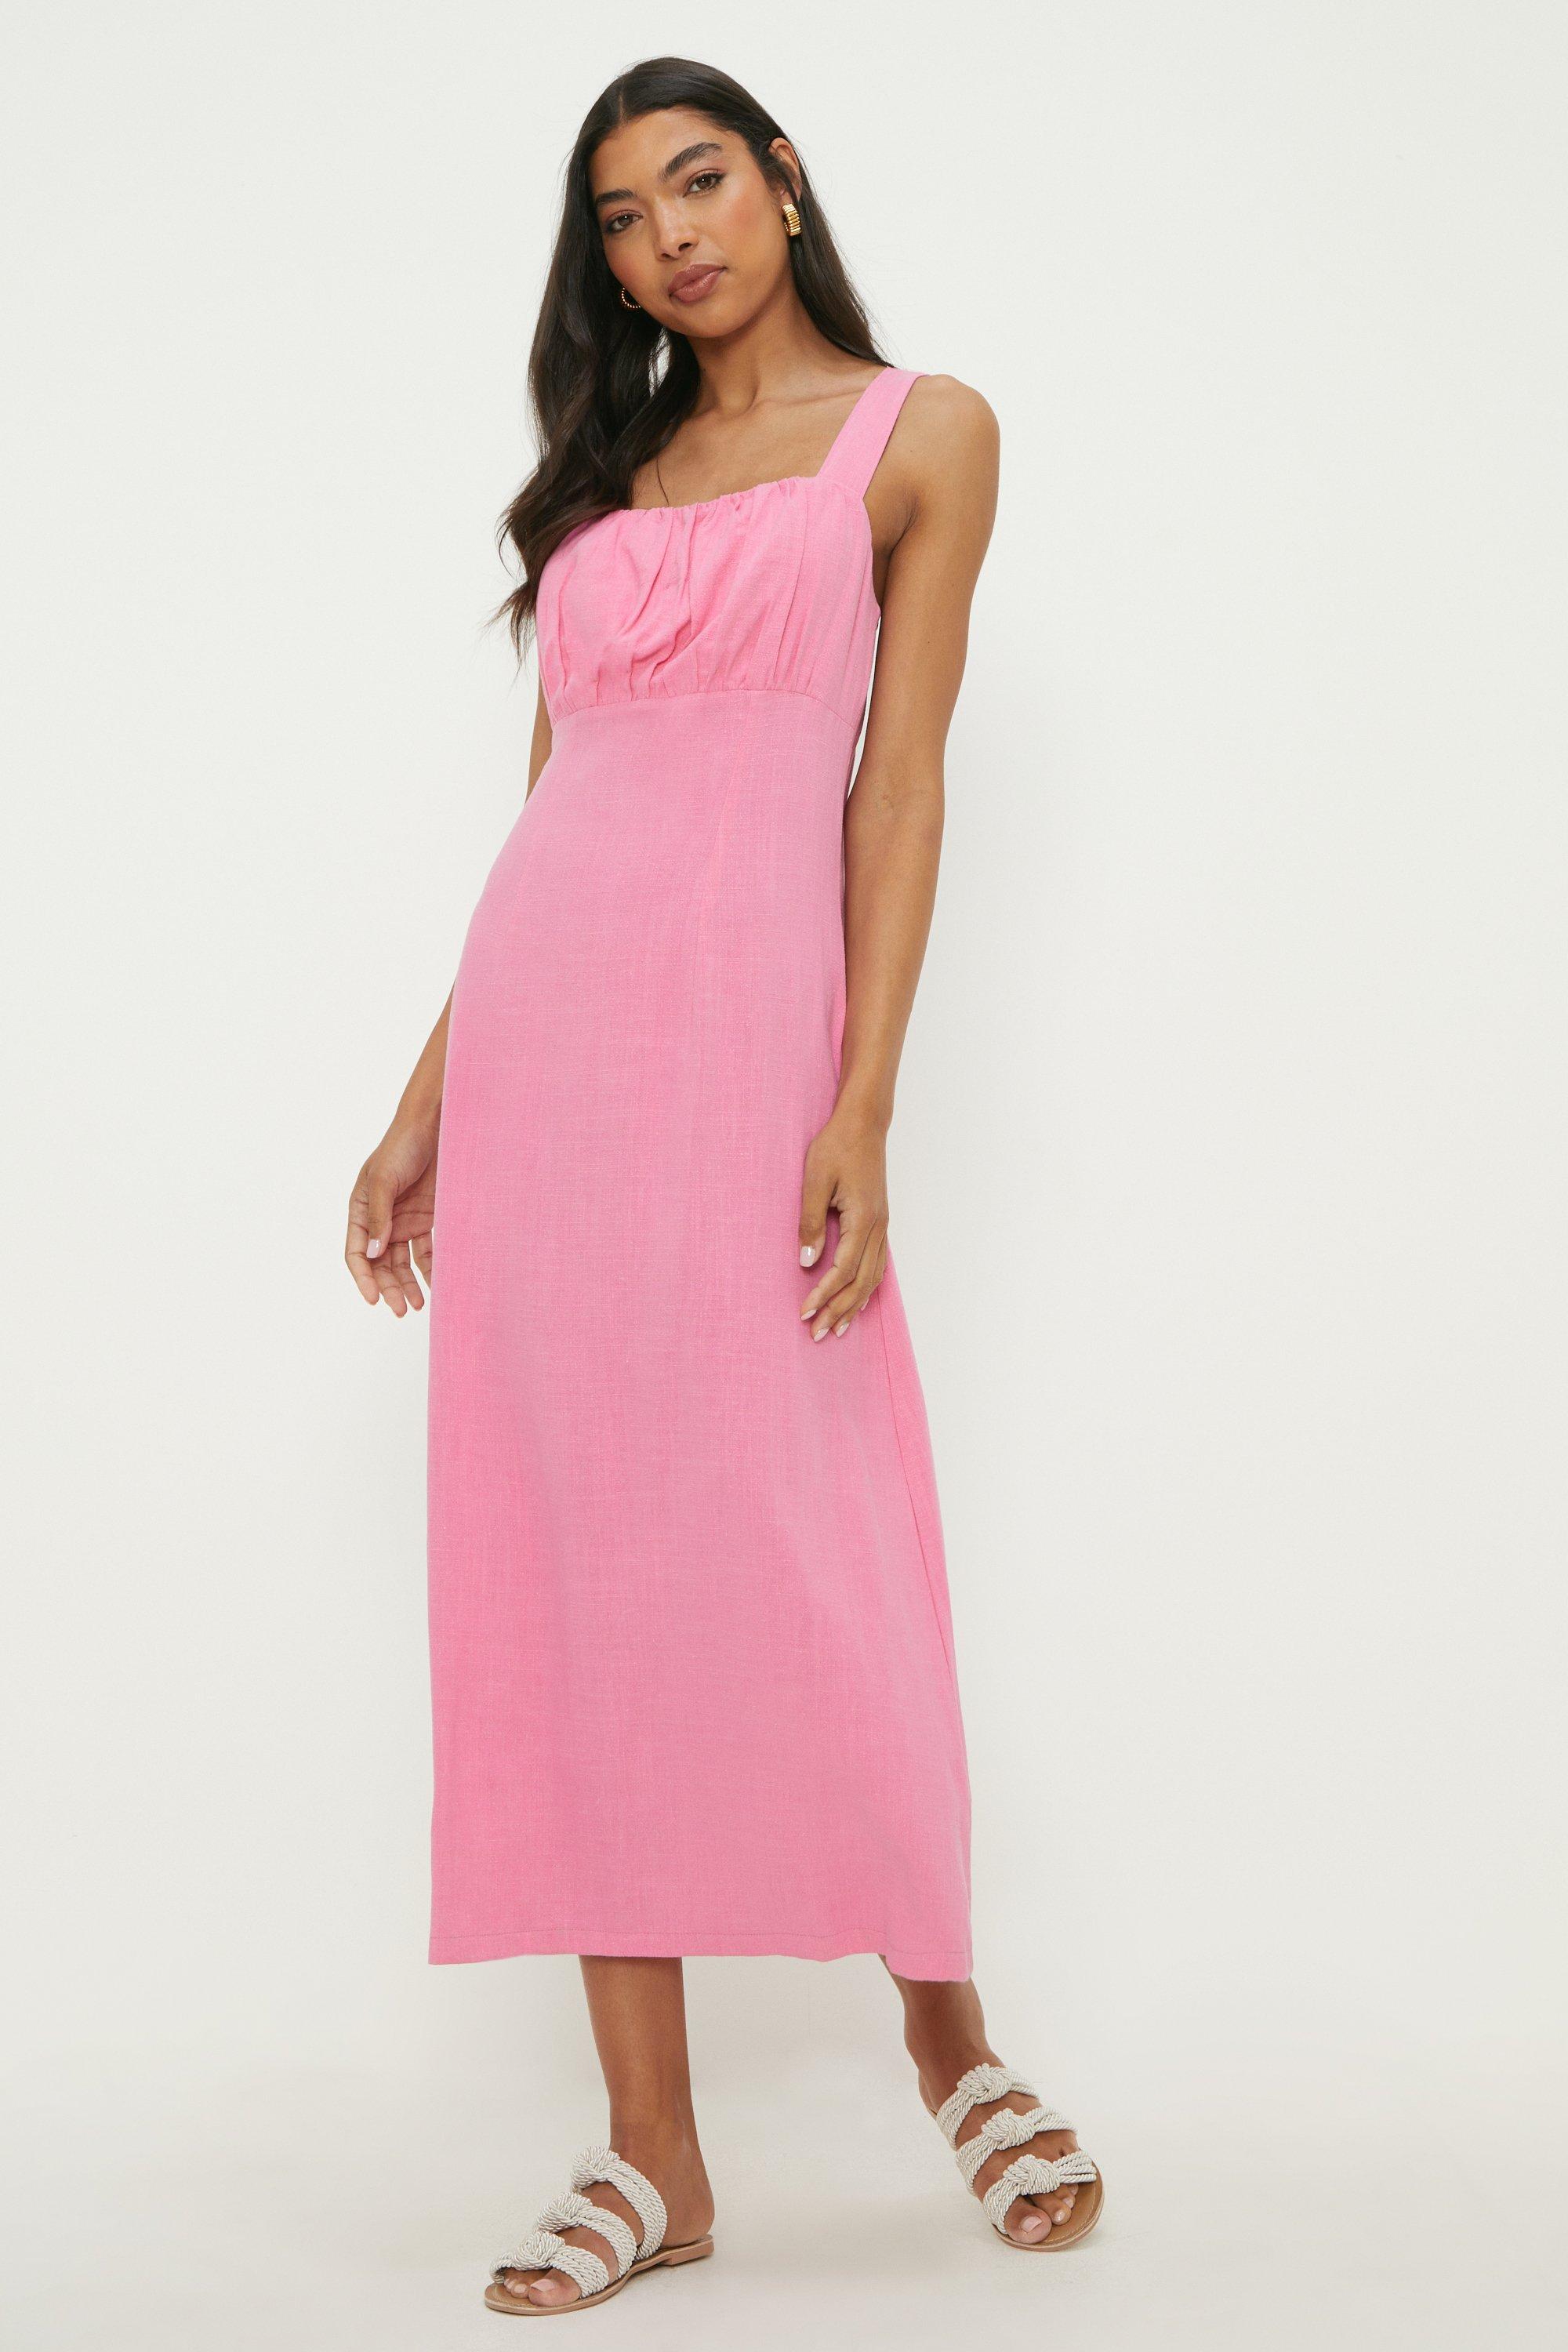 Women's Ruched Bust Strappy Midi Dress - pink - 12